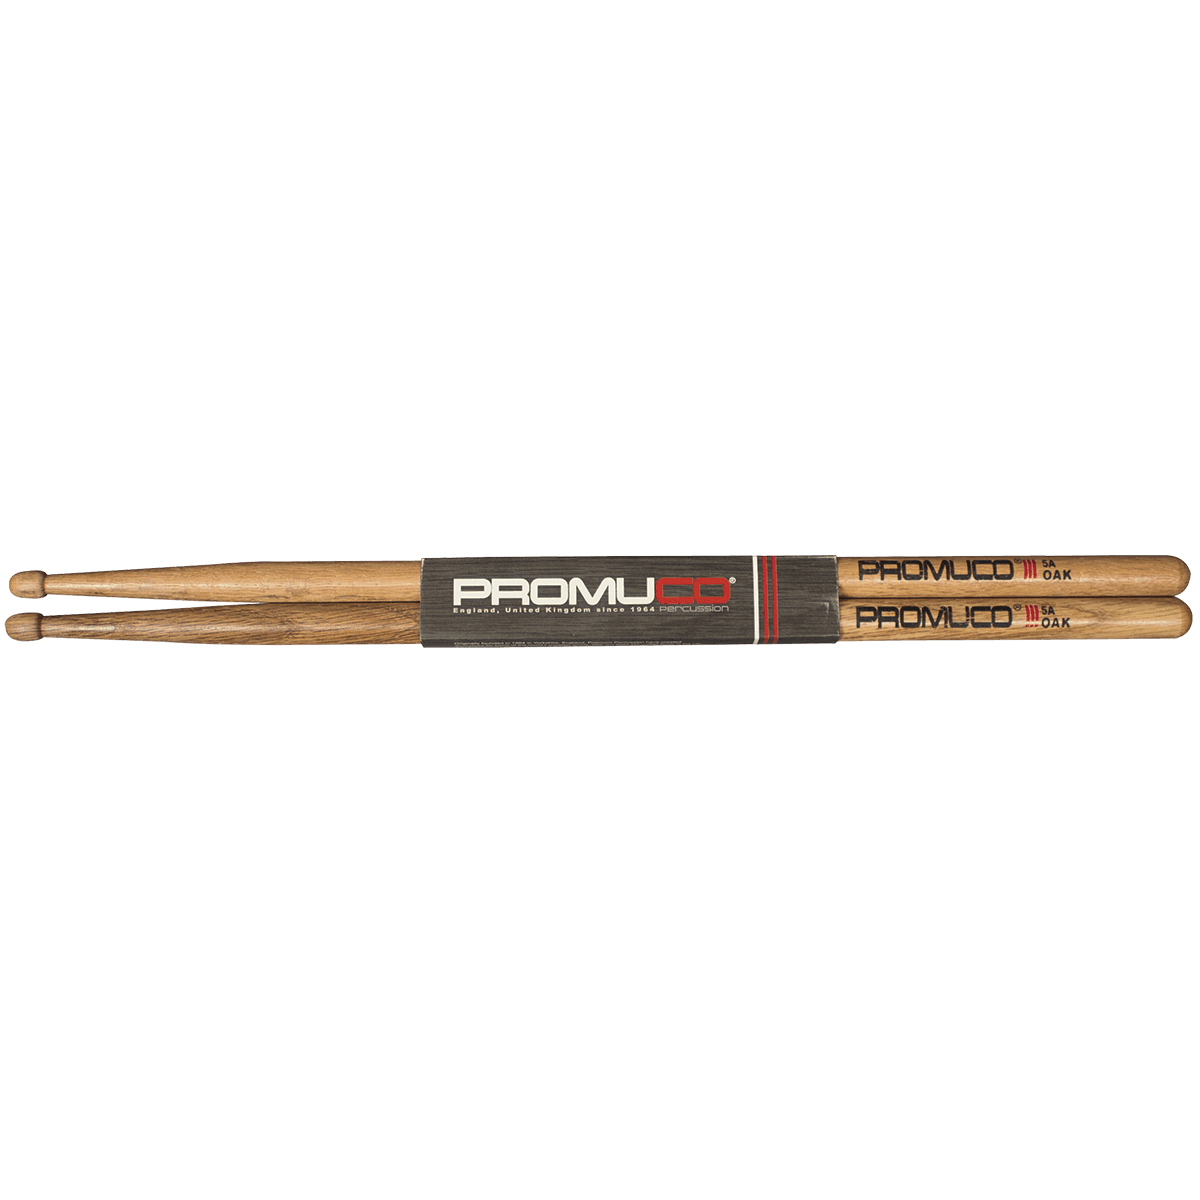 Promuco Oak 5A Wood Tip Drumsticks - Drums & Percussion - Sticks & Mallets by Promuco at Muso's Stuff